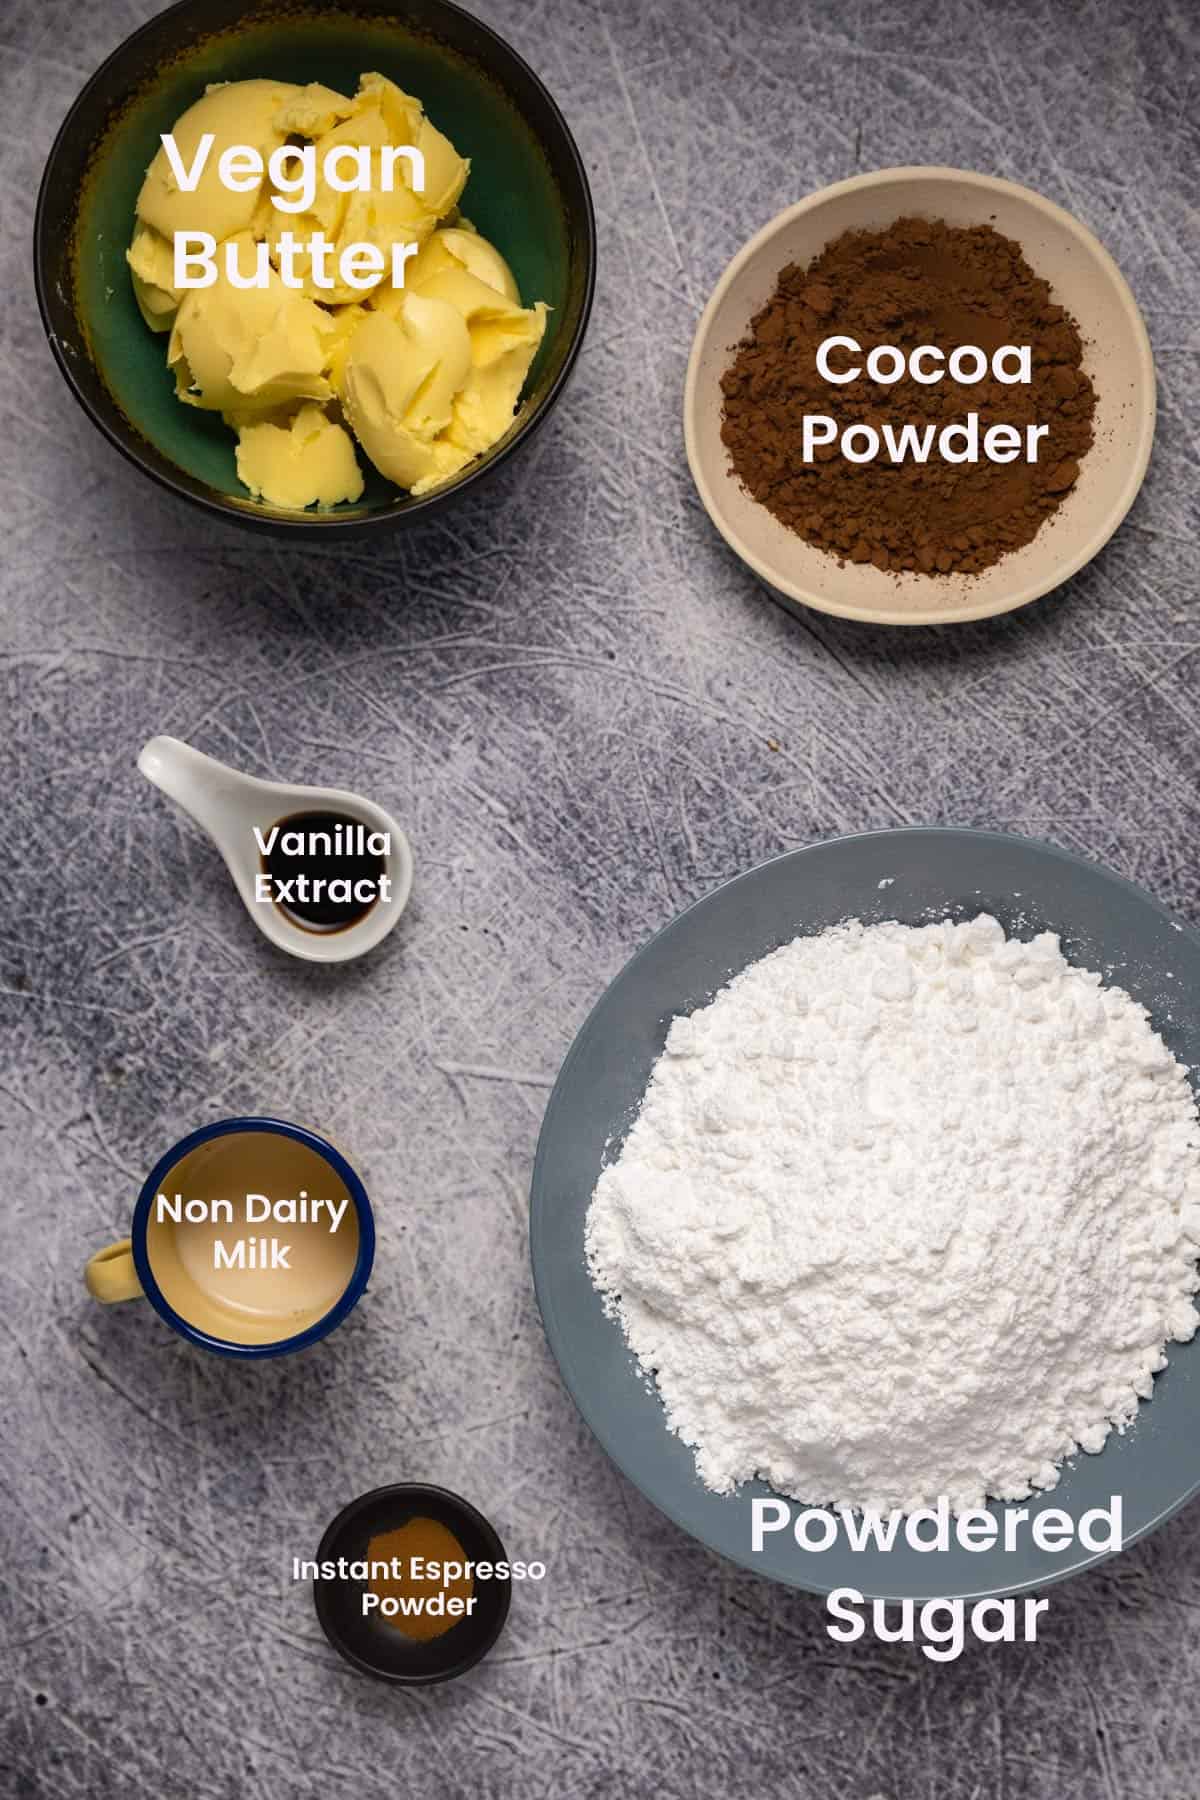 Photo of the ingredients needed to make chocolate buttercream frosting.